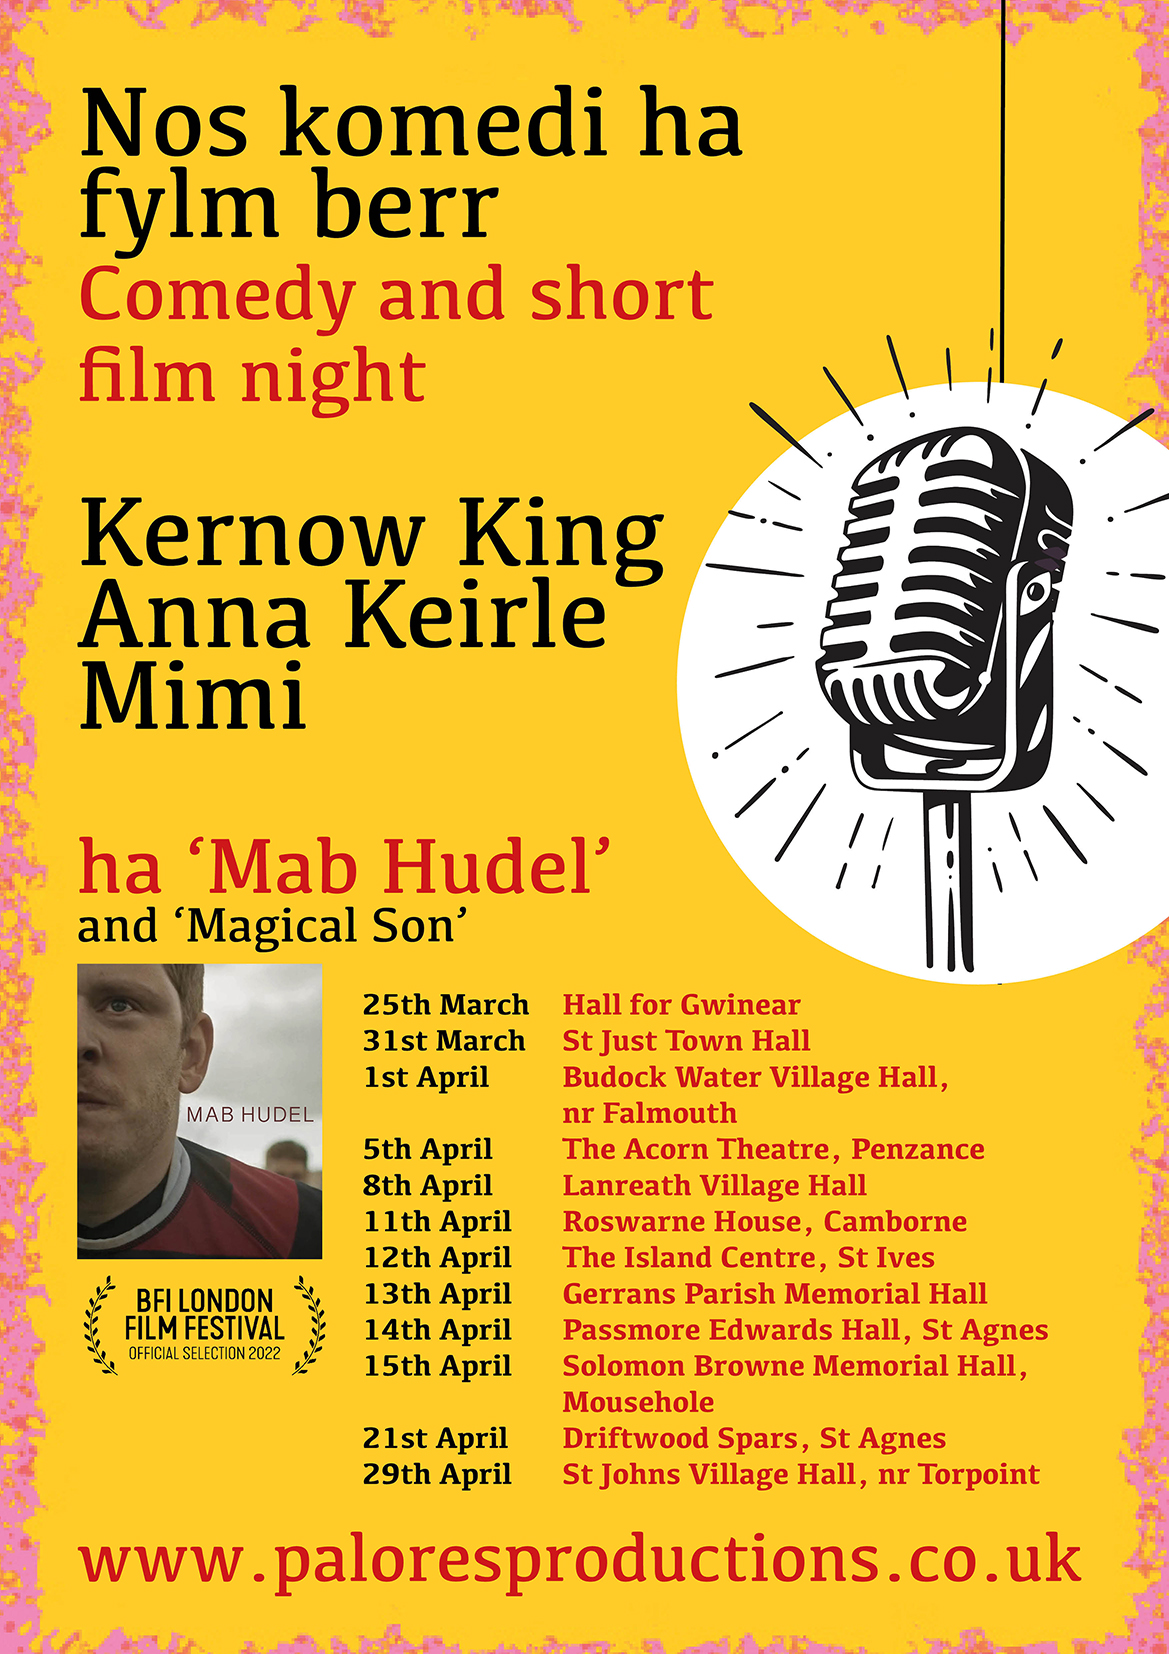 Comedy and short film night with Kernow King